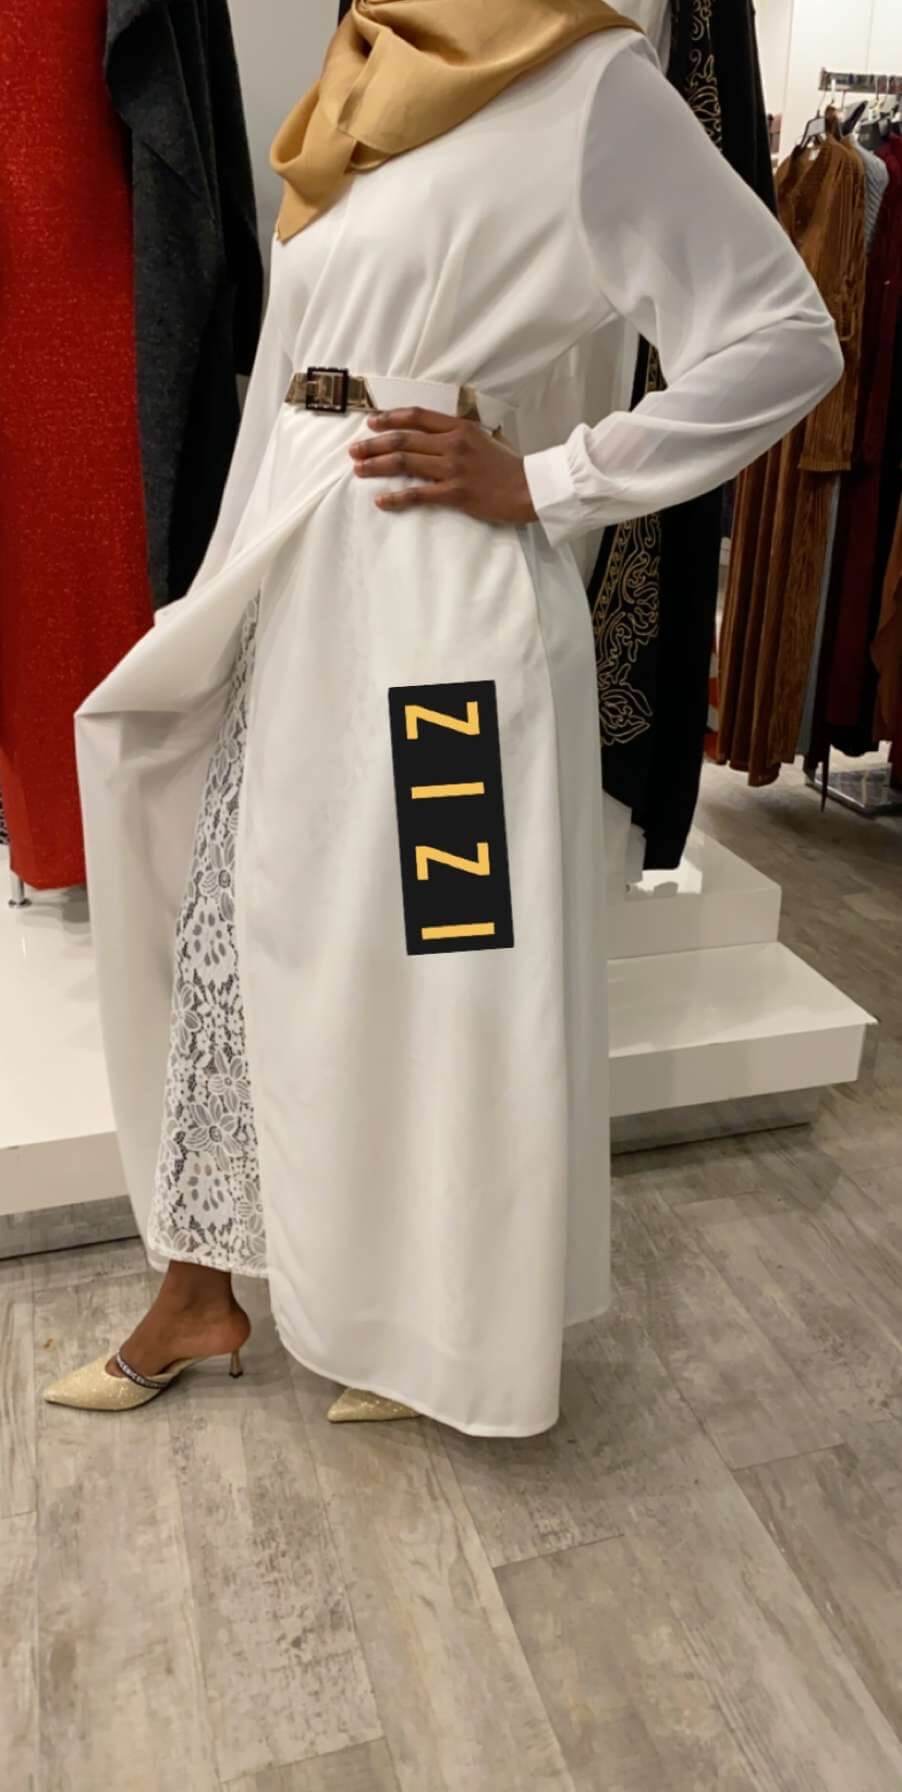 Aisha Lace Evening Dress in white color available at ZIZI Boutique